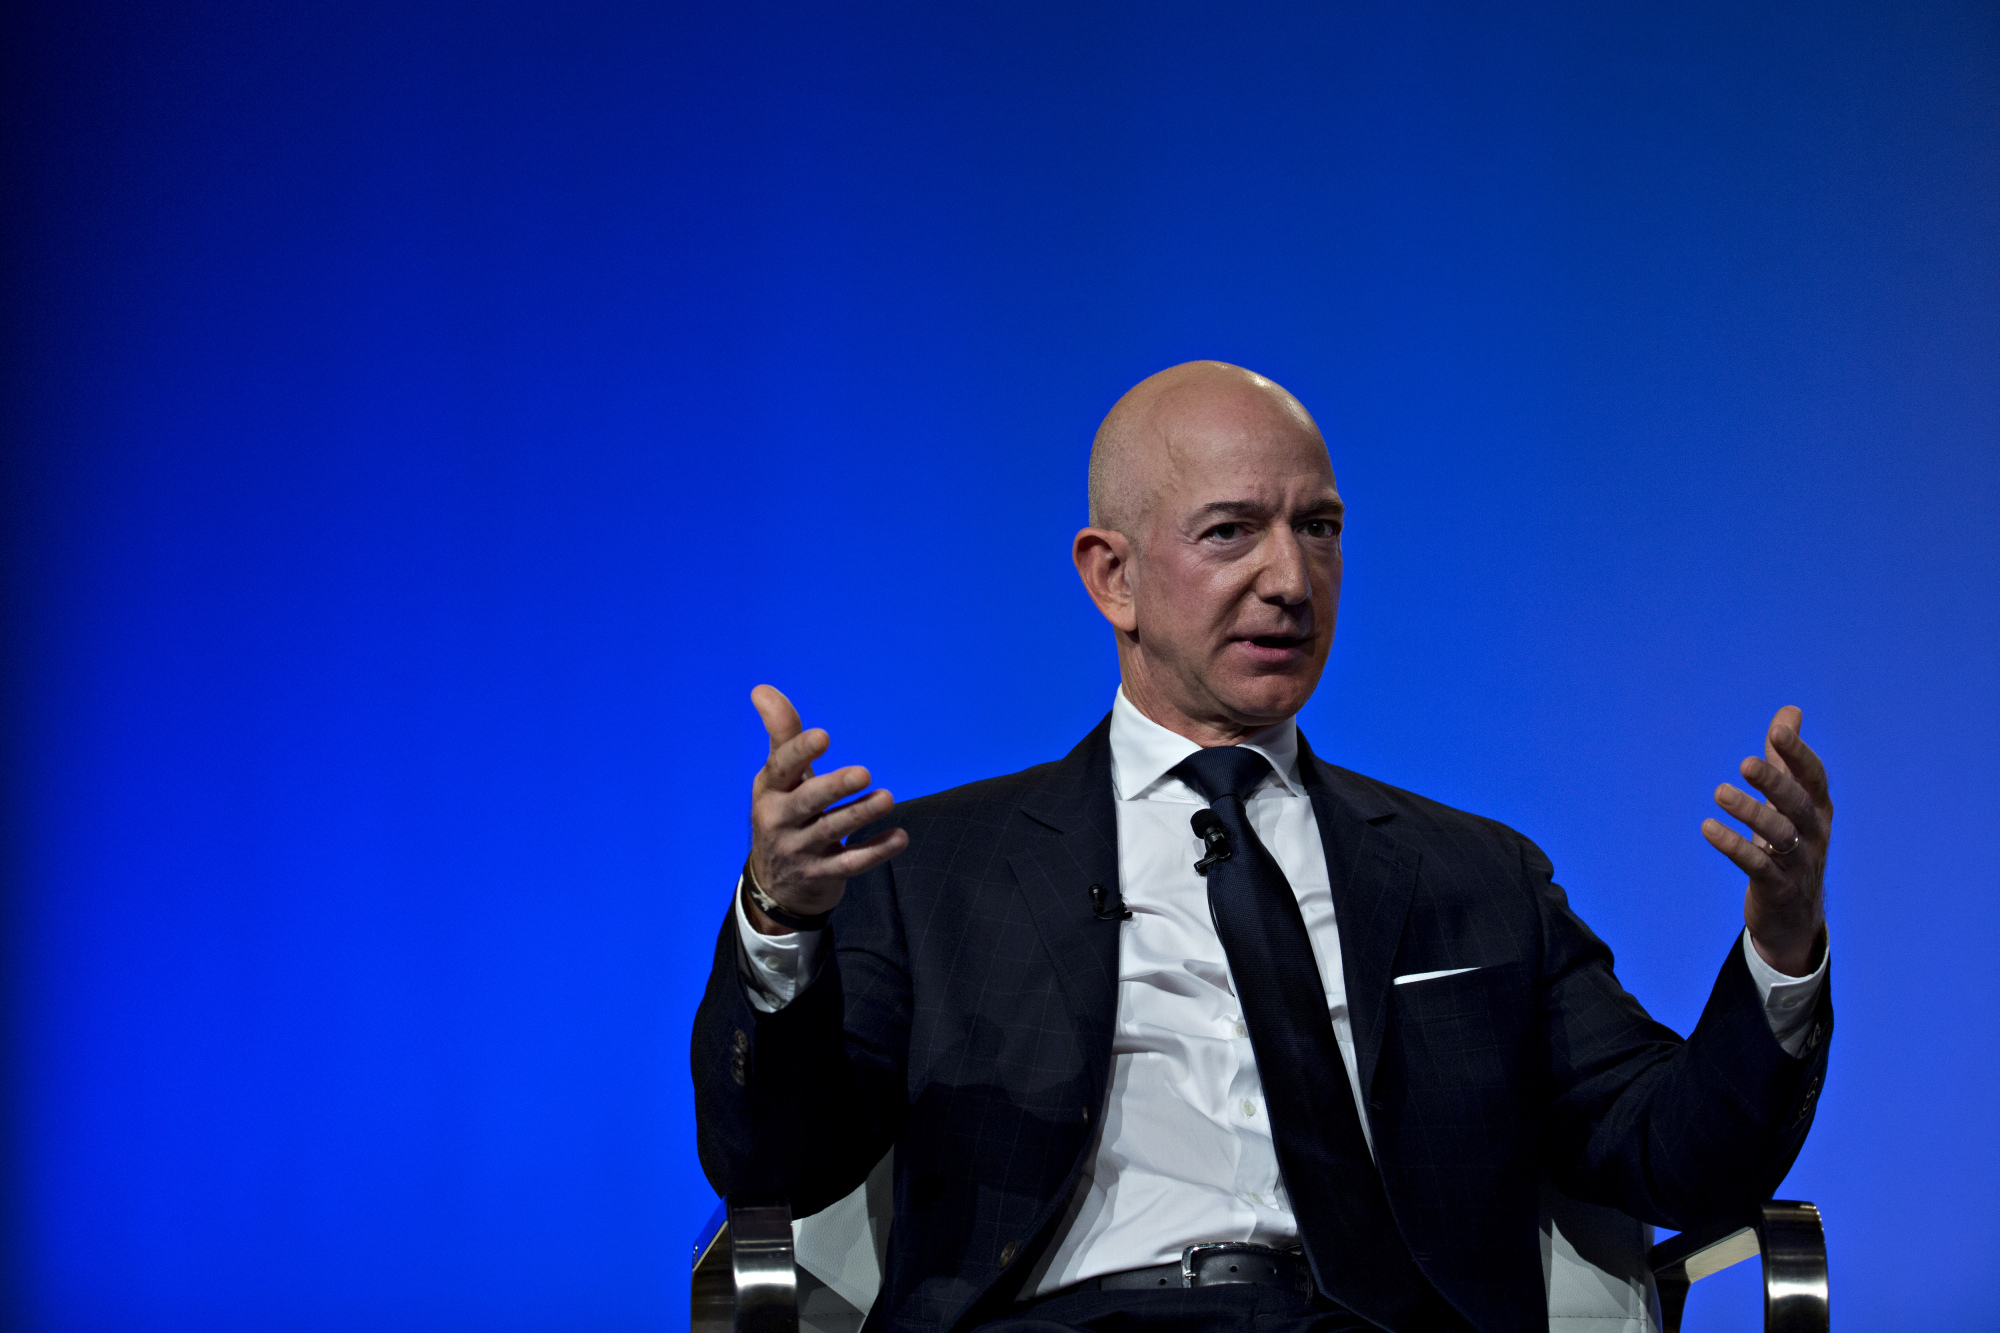 Jeff Bezos, founder and chief executive officer of Amazon.com Inc., speaks during a discussion at the Air Force Association's Air, Space and Cyber Conference.